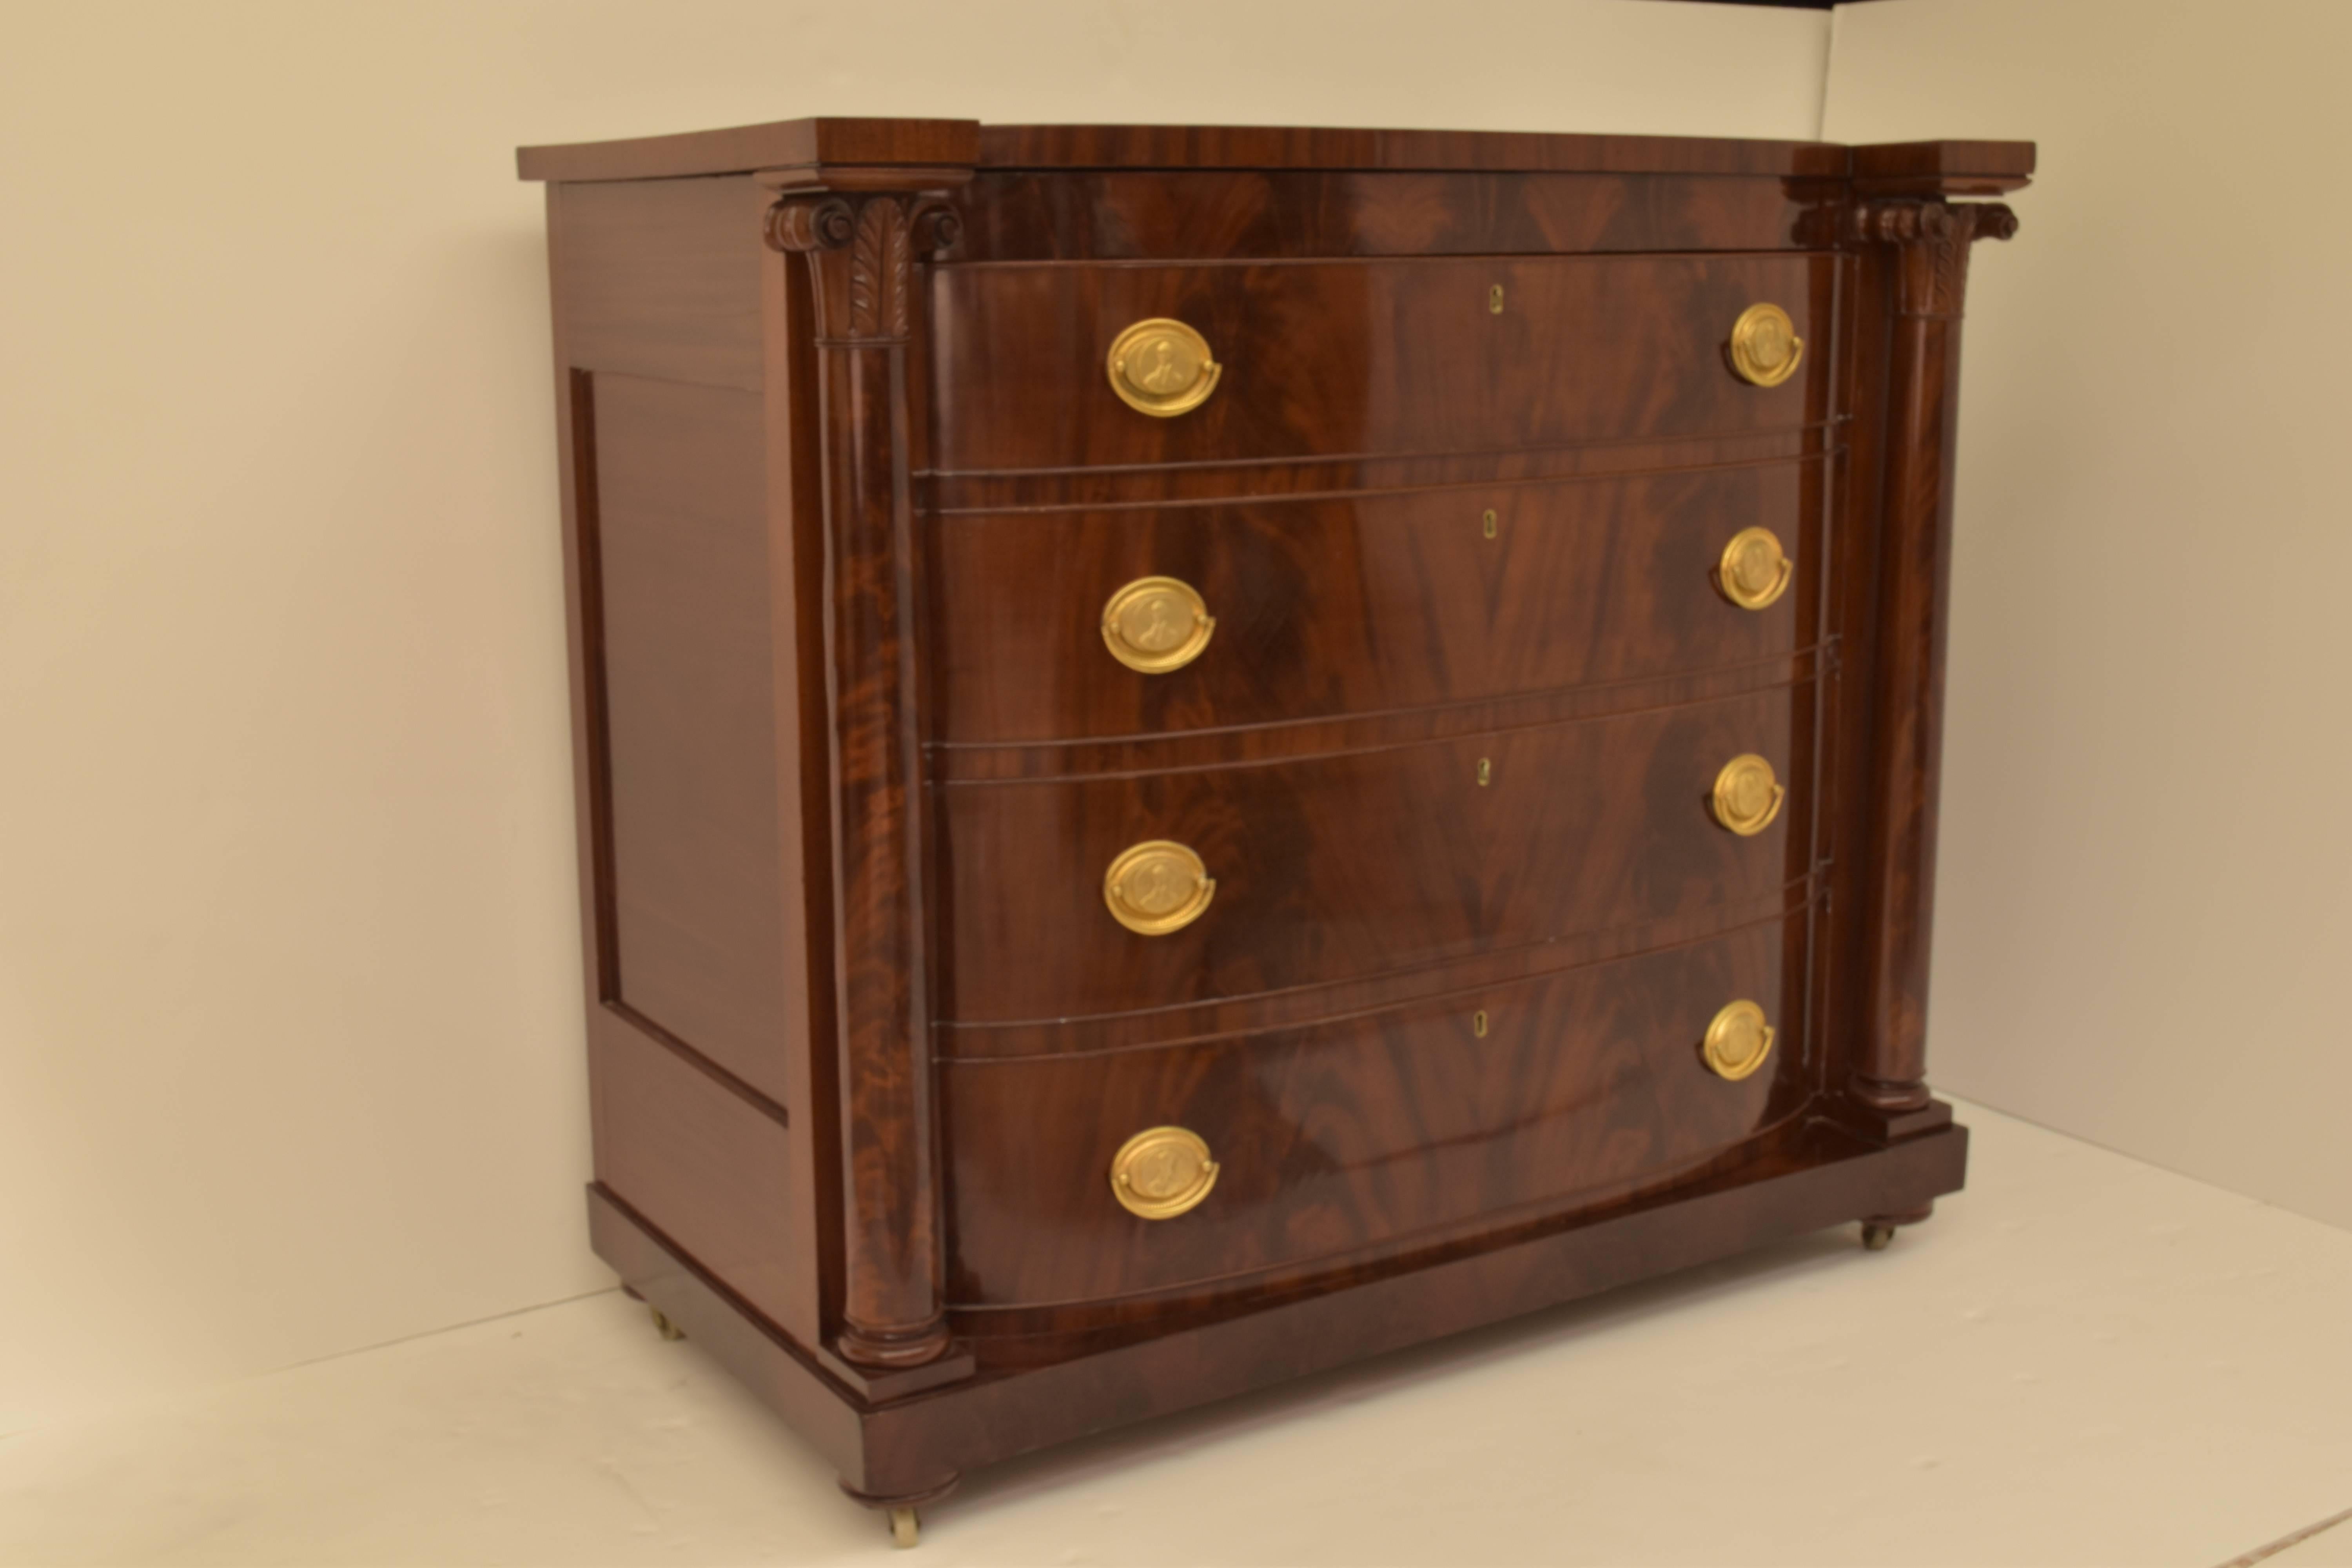 A mahogany bow front chest of drawers with period George Washington brasses. The chest features four drawers.